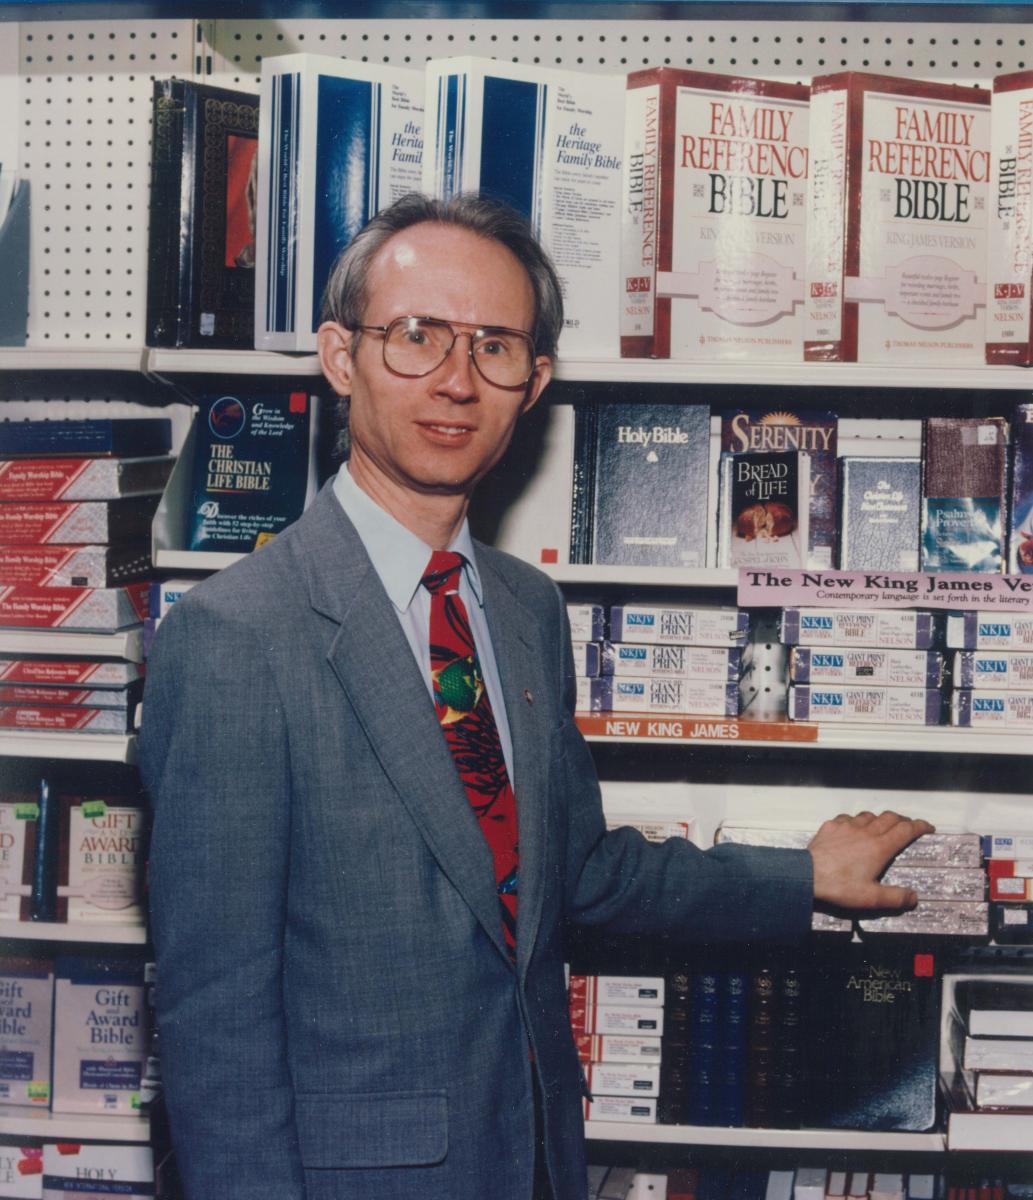 aul Glenn (circa 1990) stands by the Bible shelves in the Adventist Book Center’s prior location in Takoma Park, Md.